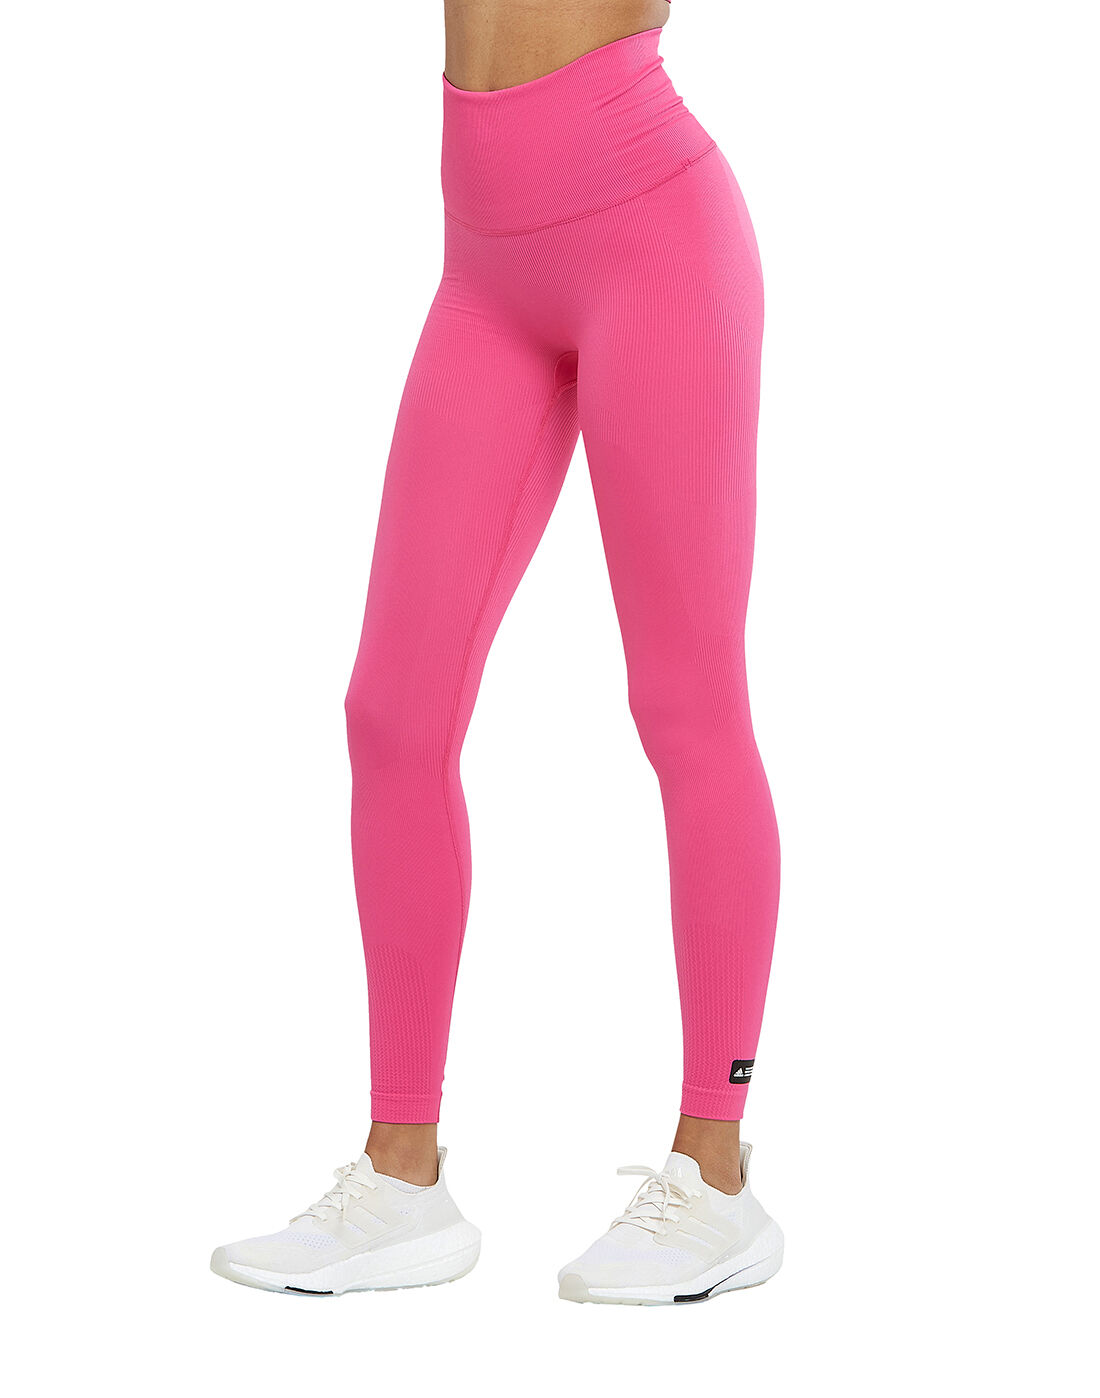 adidas Formotion Sculpt Two-Tone Tights - Orange | adidas US | Casual  bottoms, Tights, Tight leggings